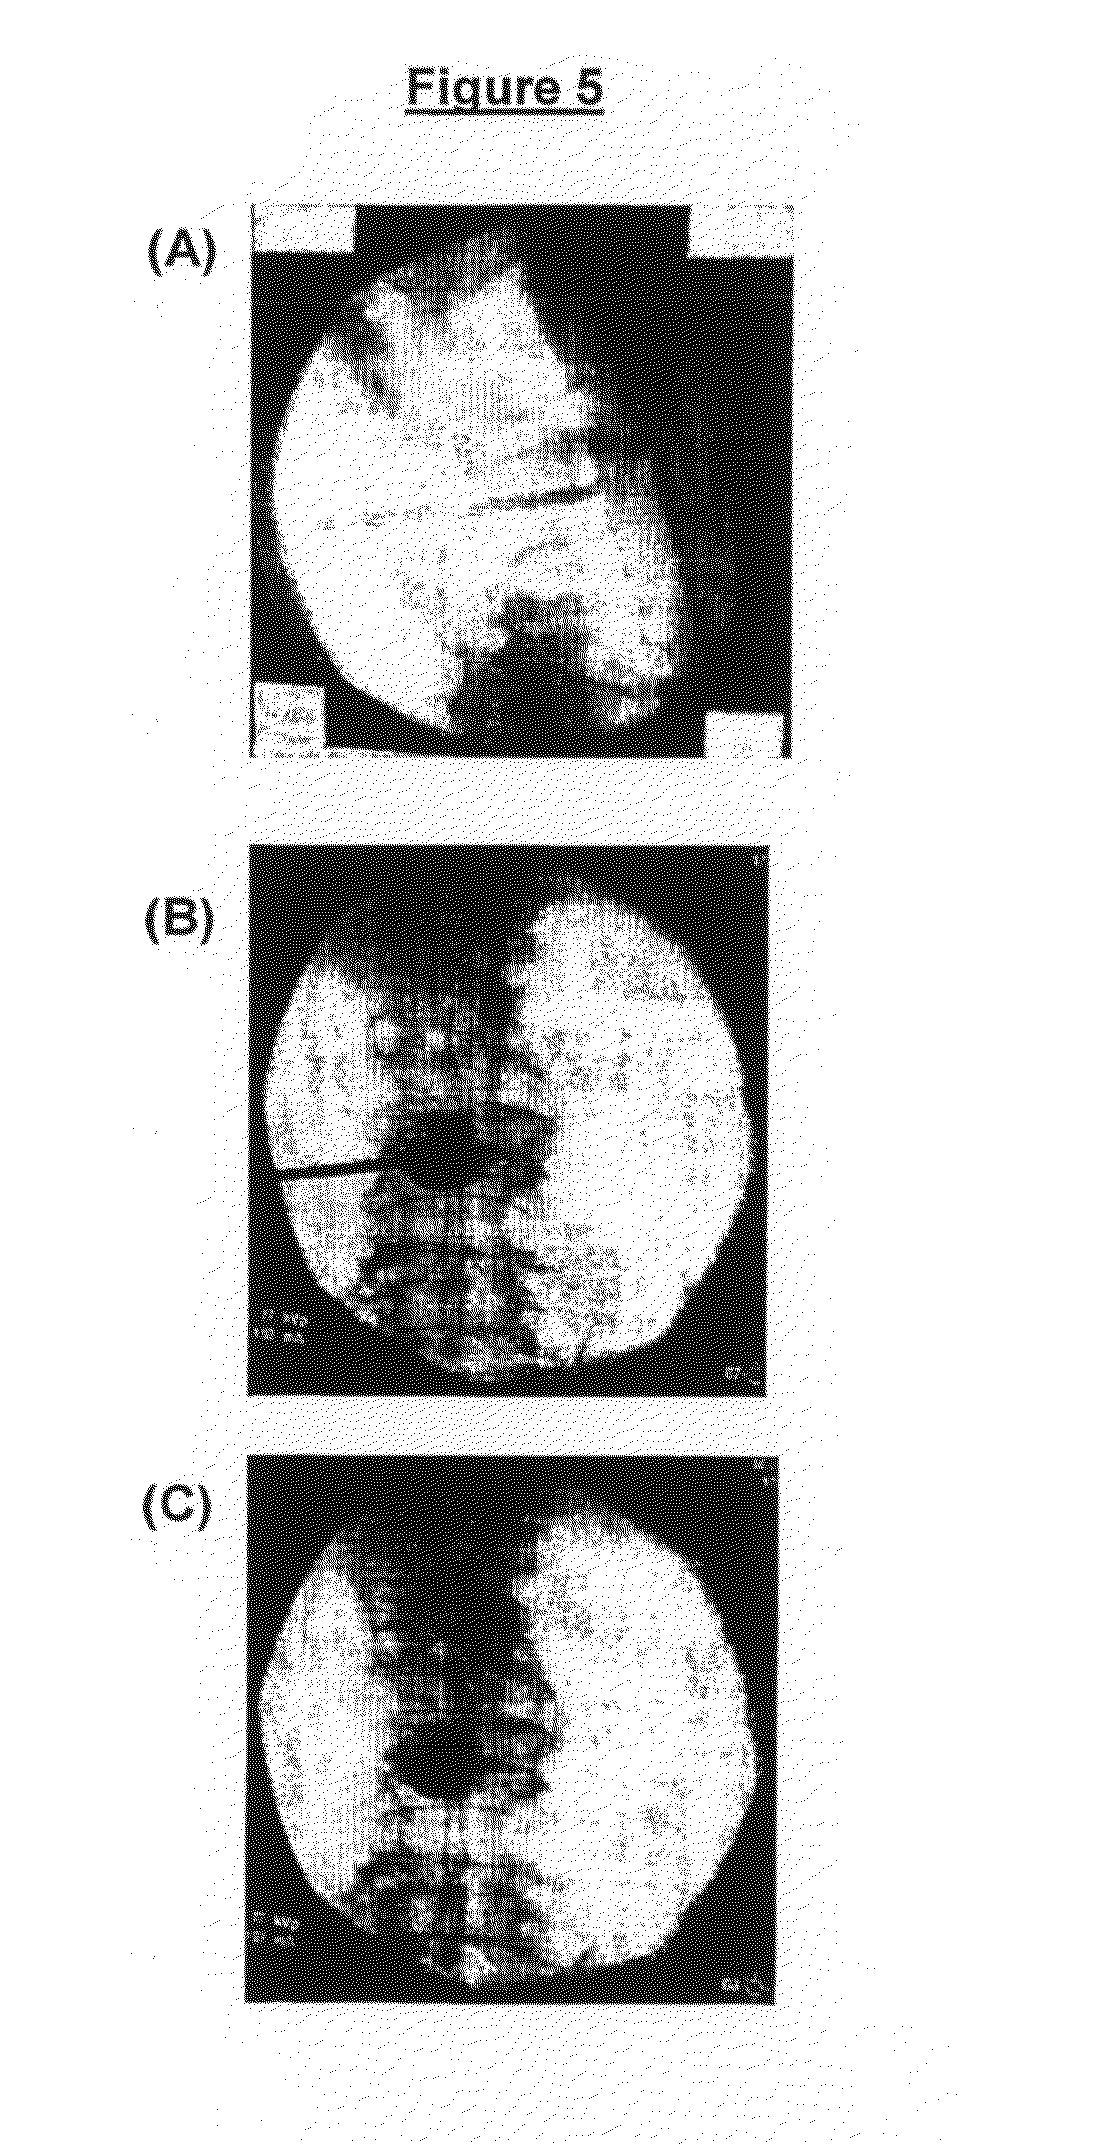 Bone and/or dental cement composition and uses thereof